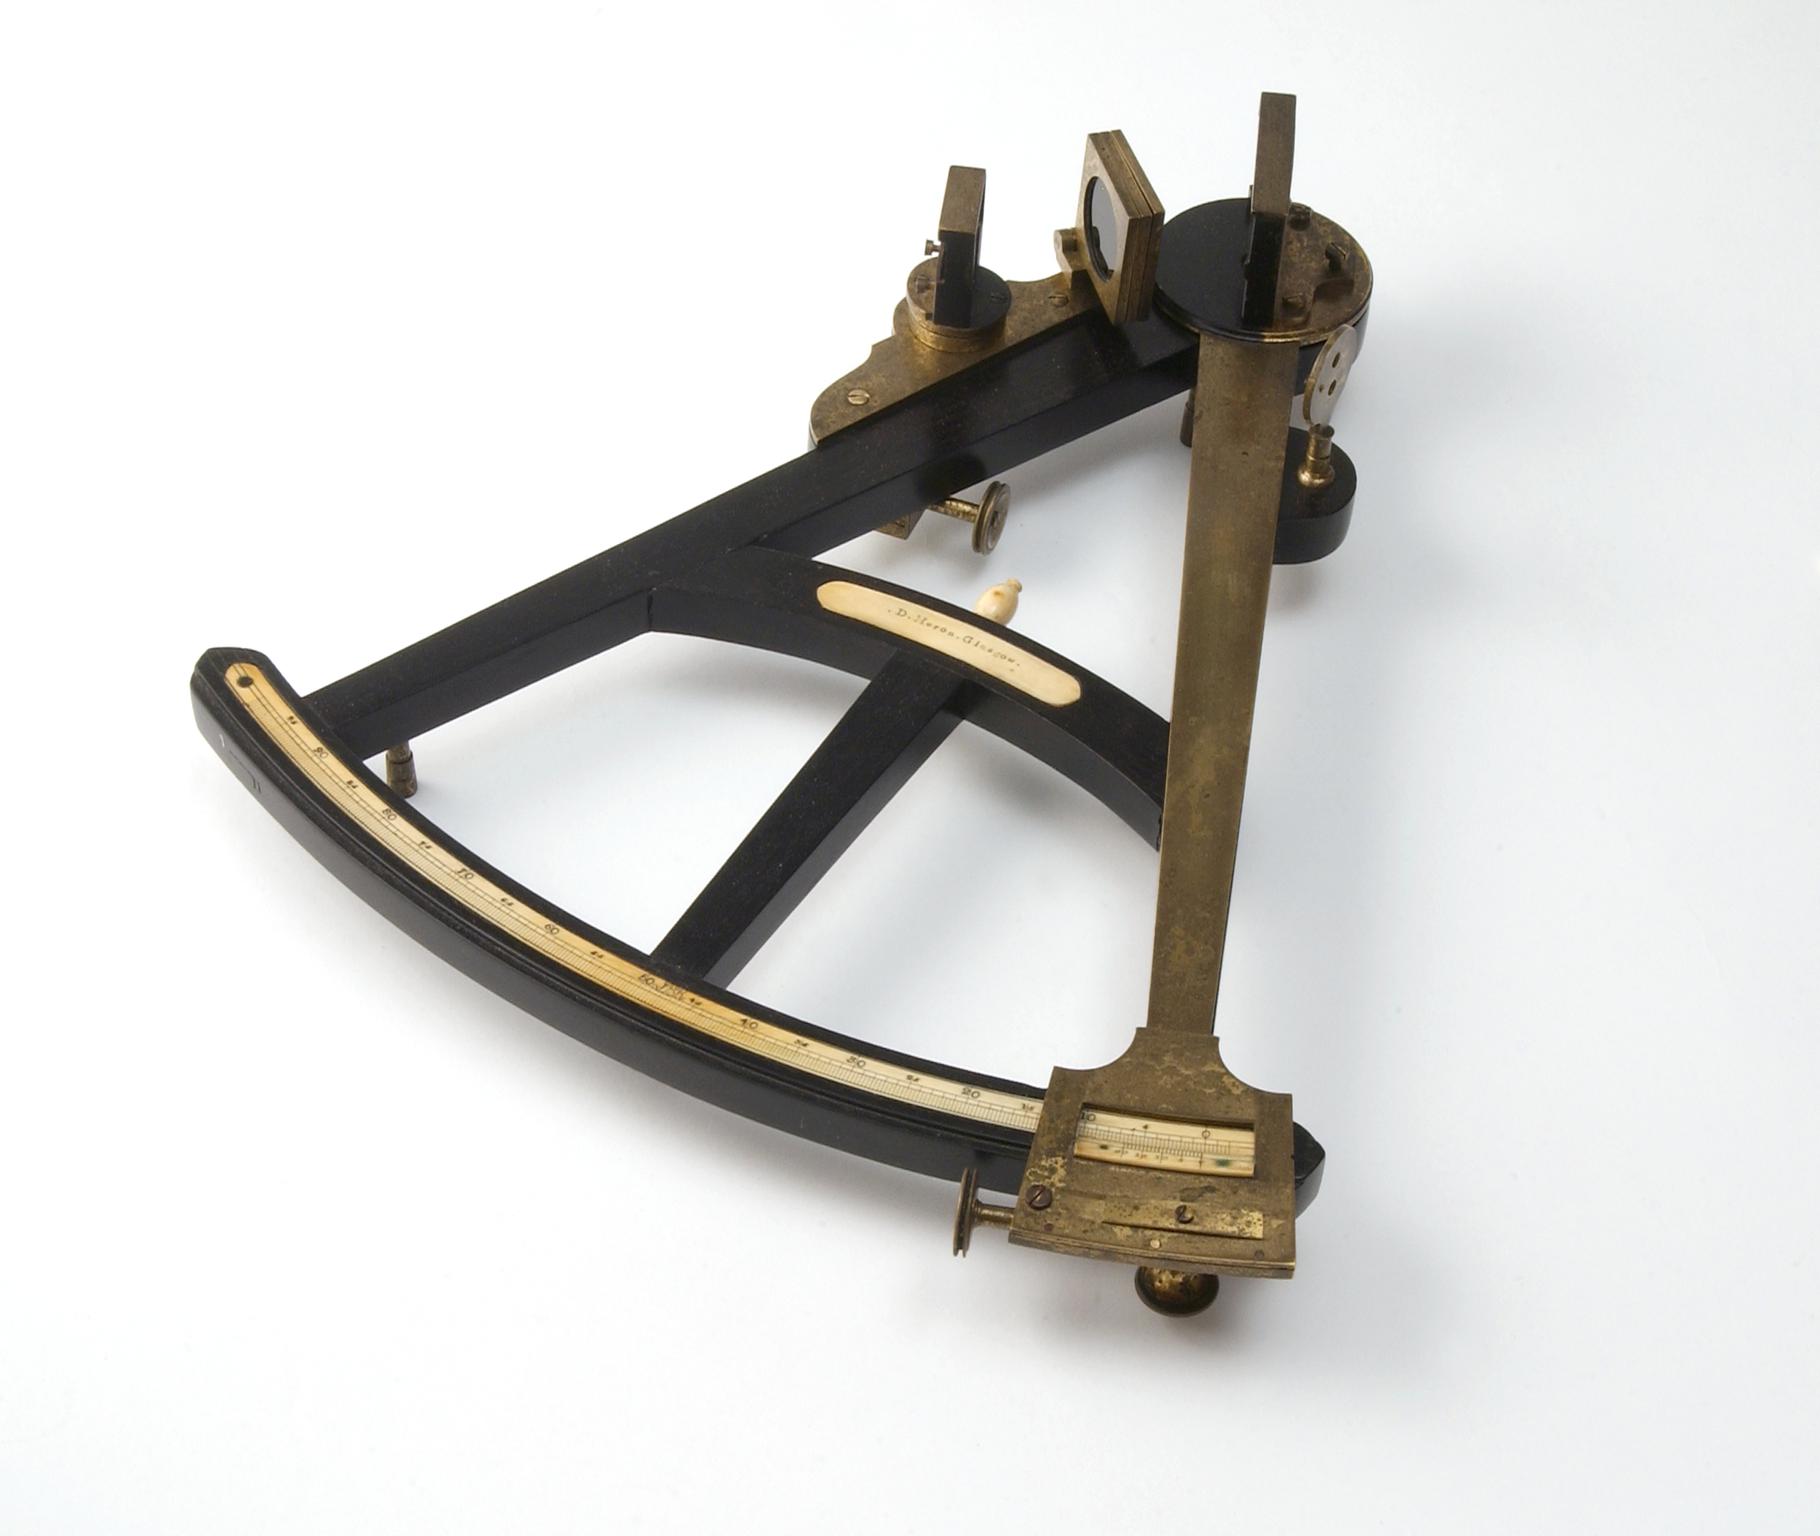 Octant from the M.A. JAMES